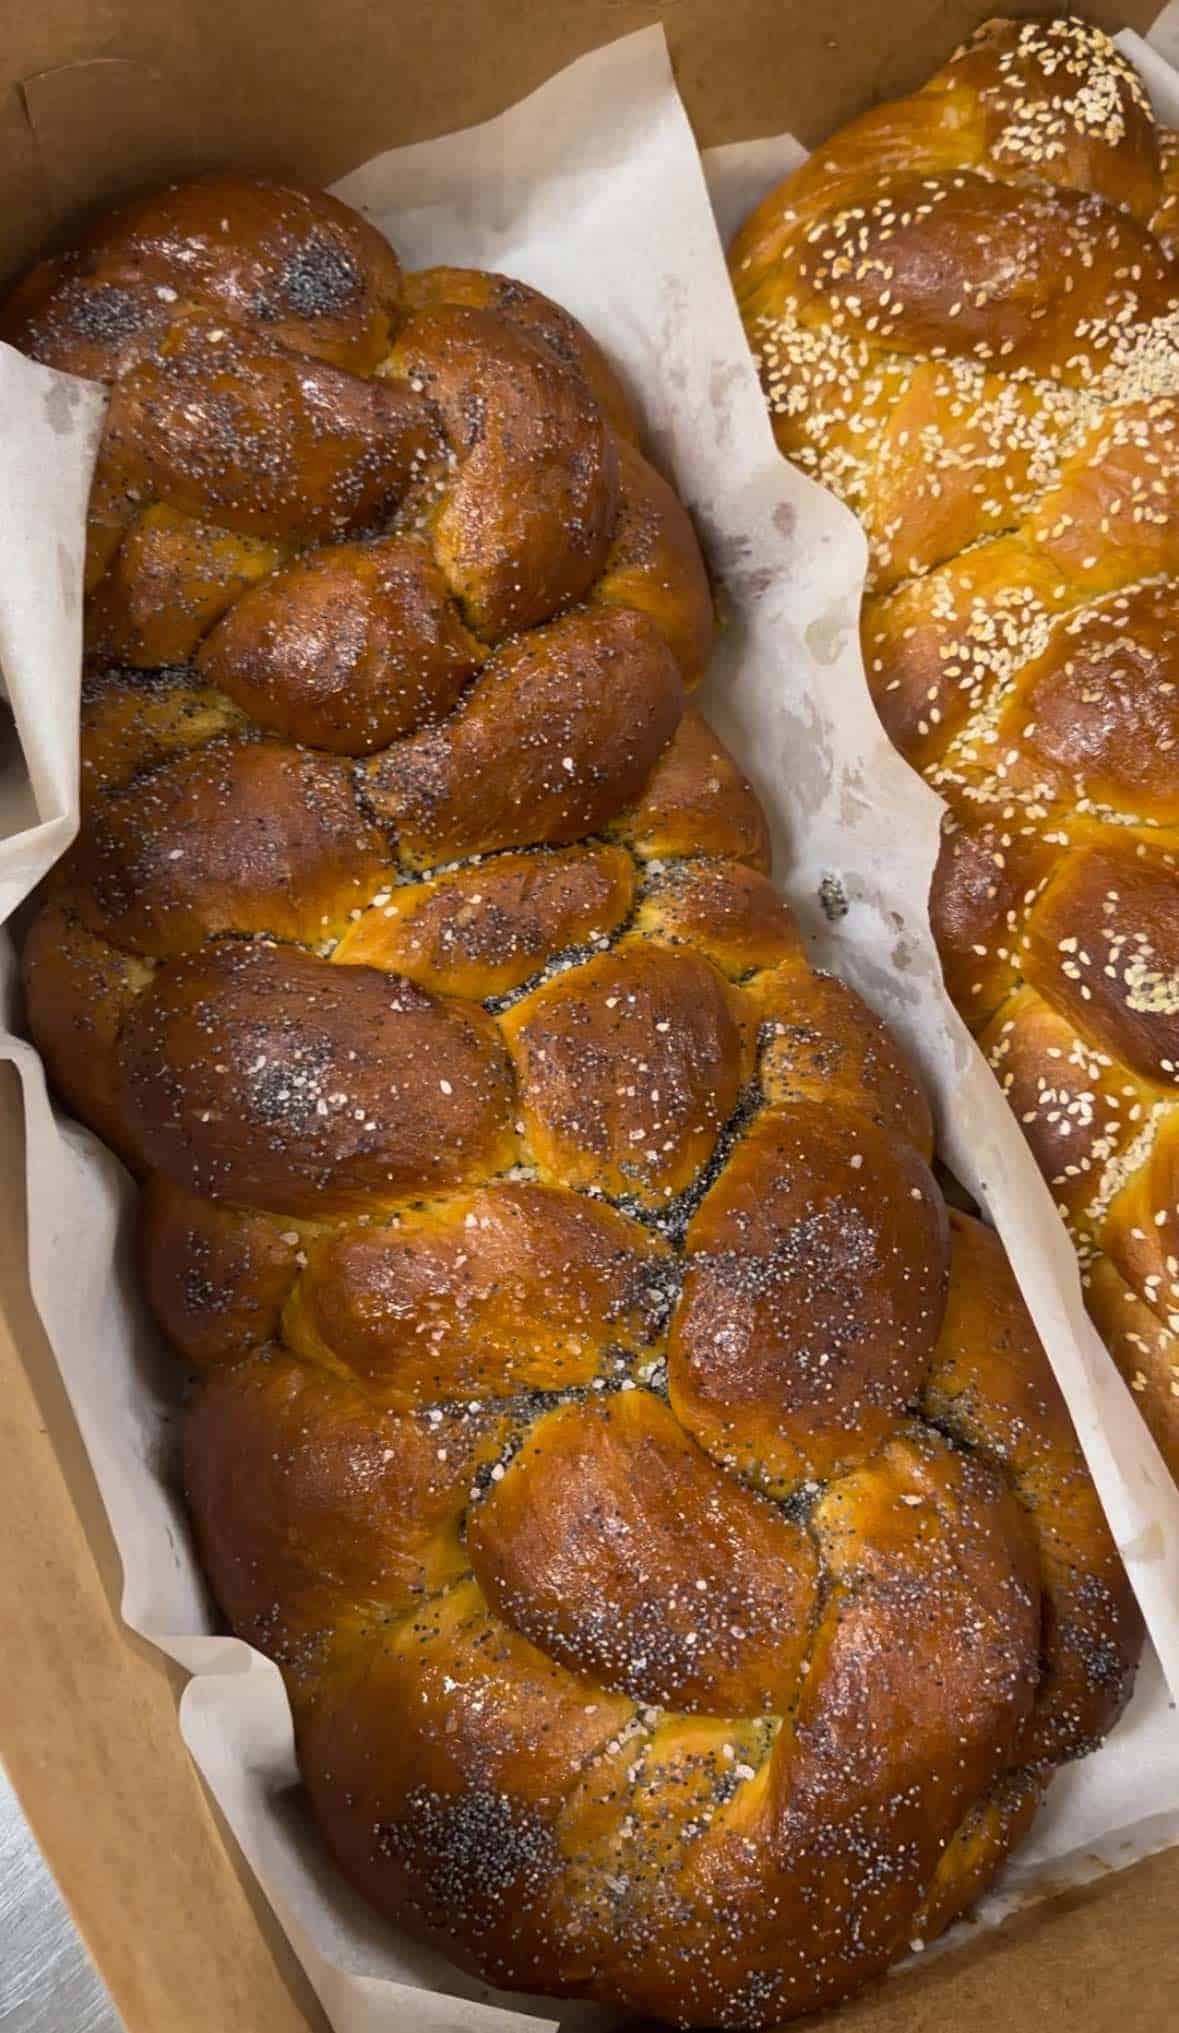 Two braided breads in a cardboard box.